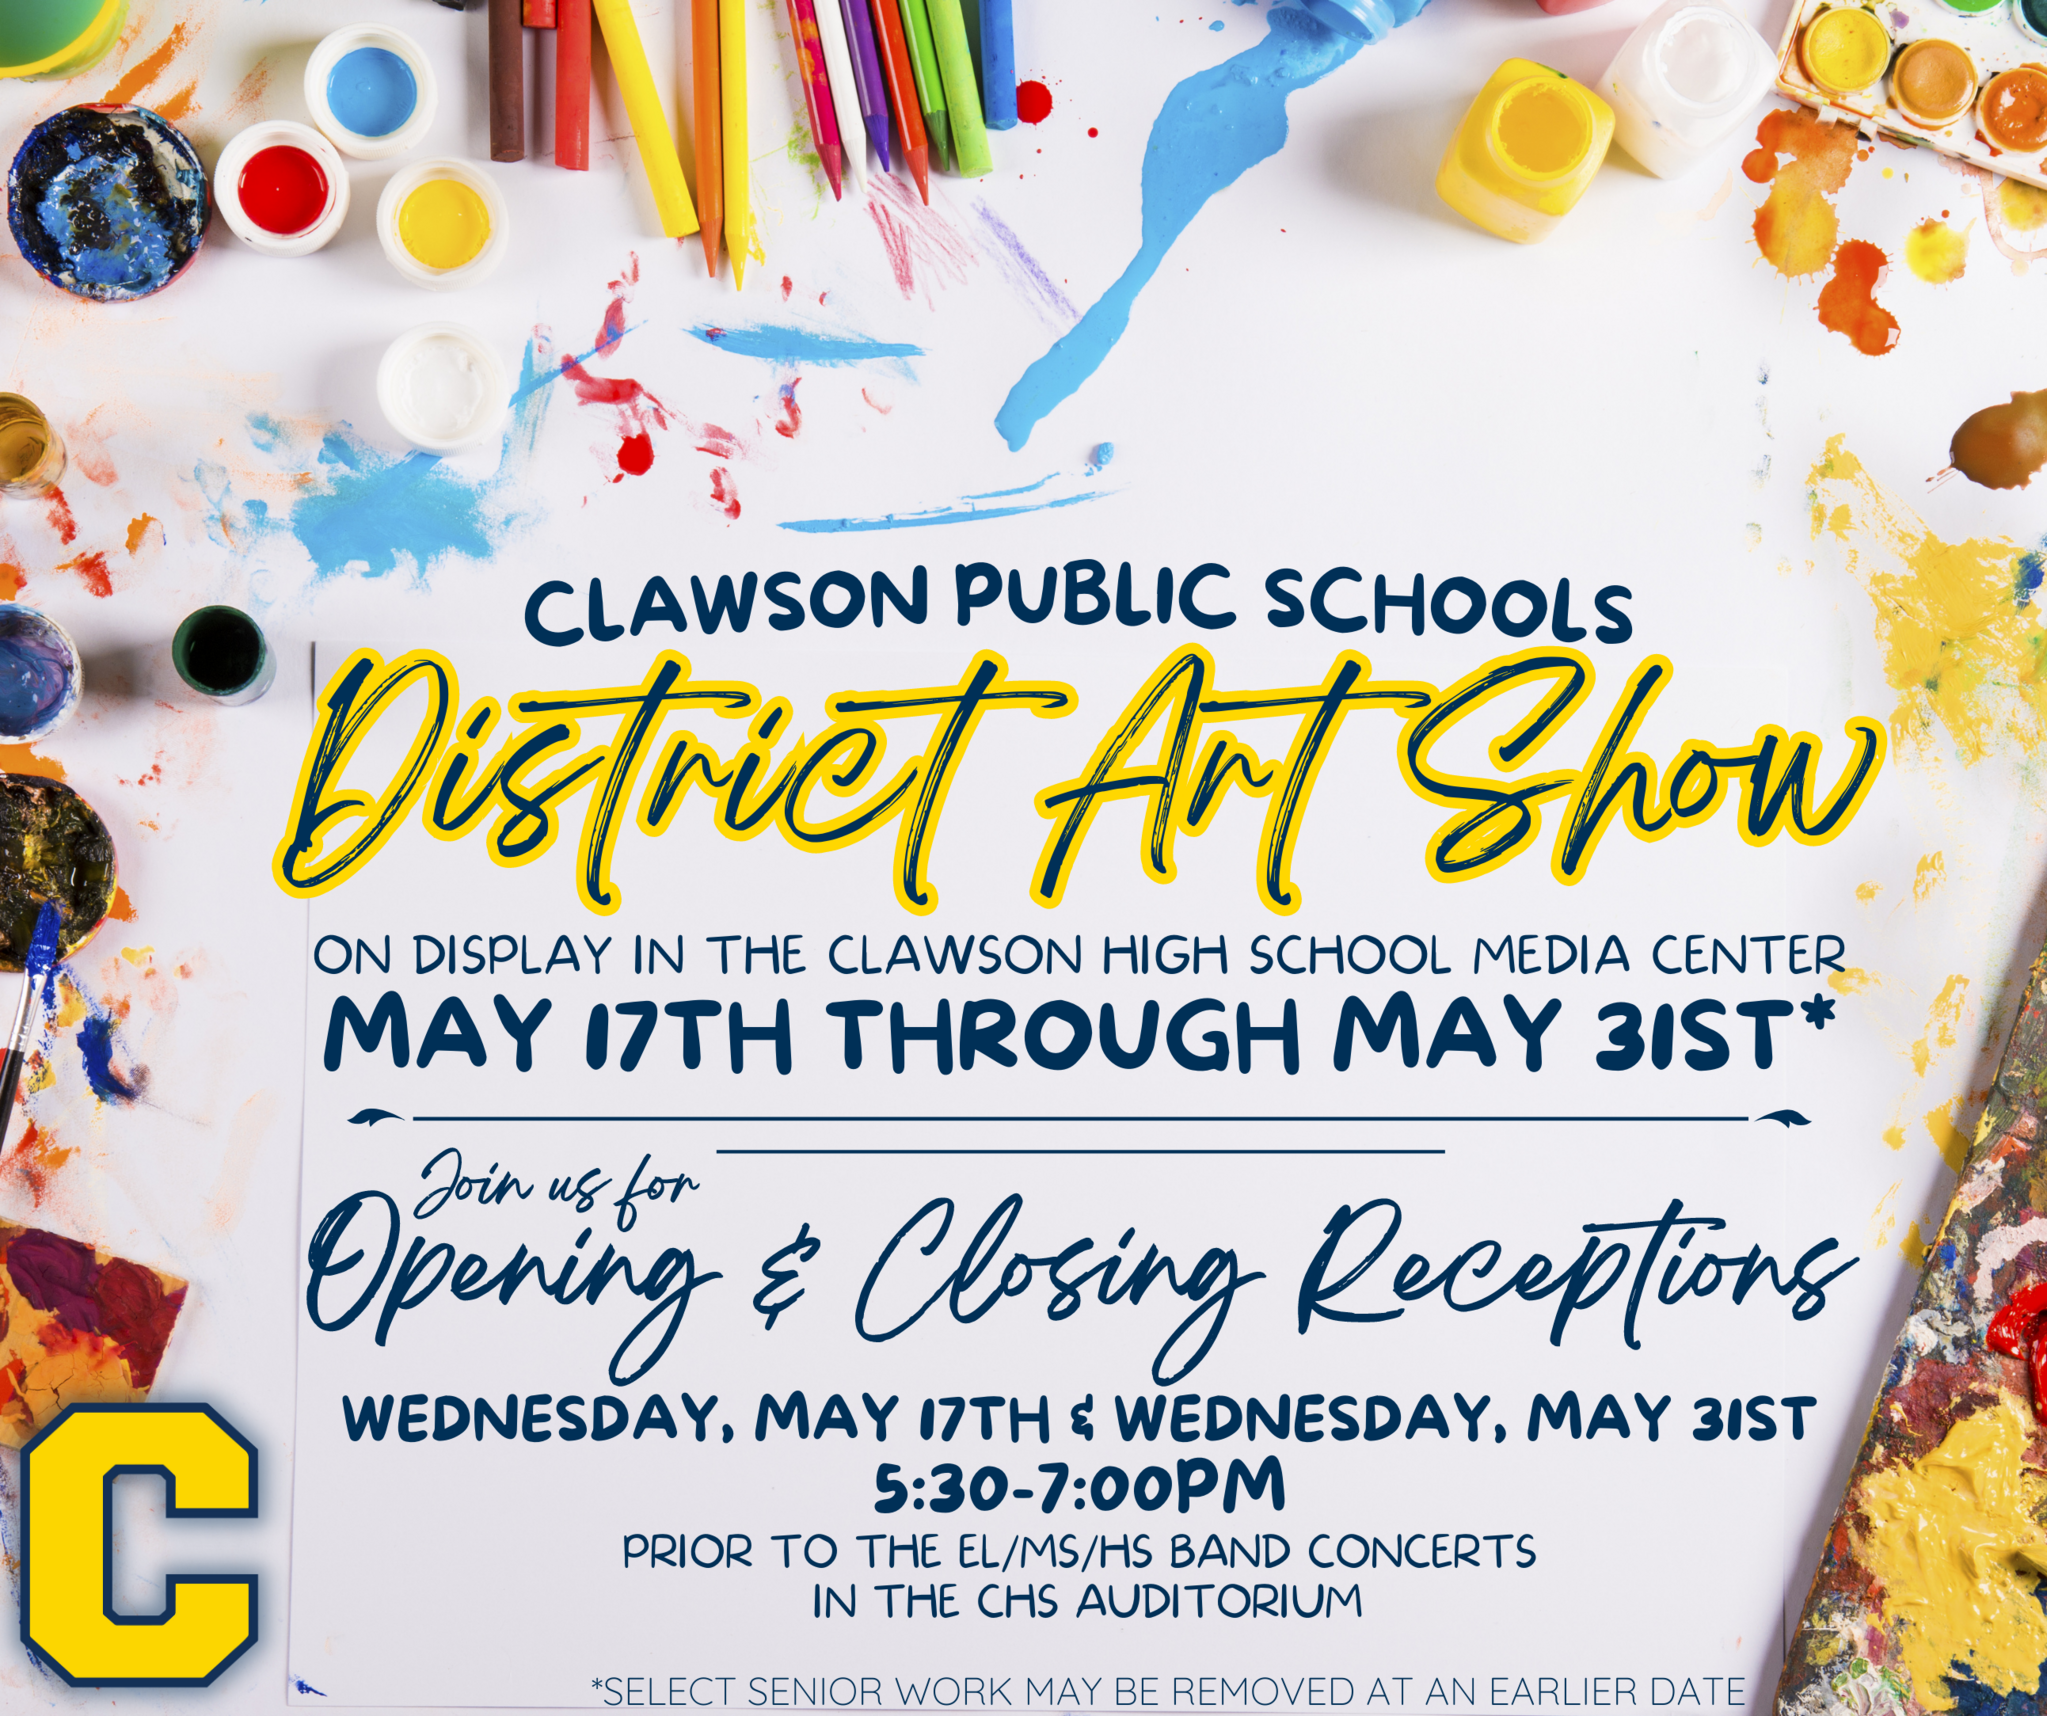 Clawson Public Schools District Art Show on Display in the Clawson High School Media Center on May 17th through May 31st.